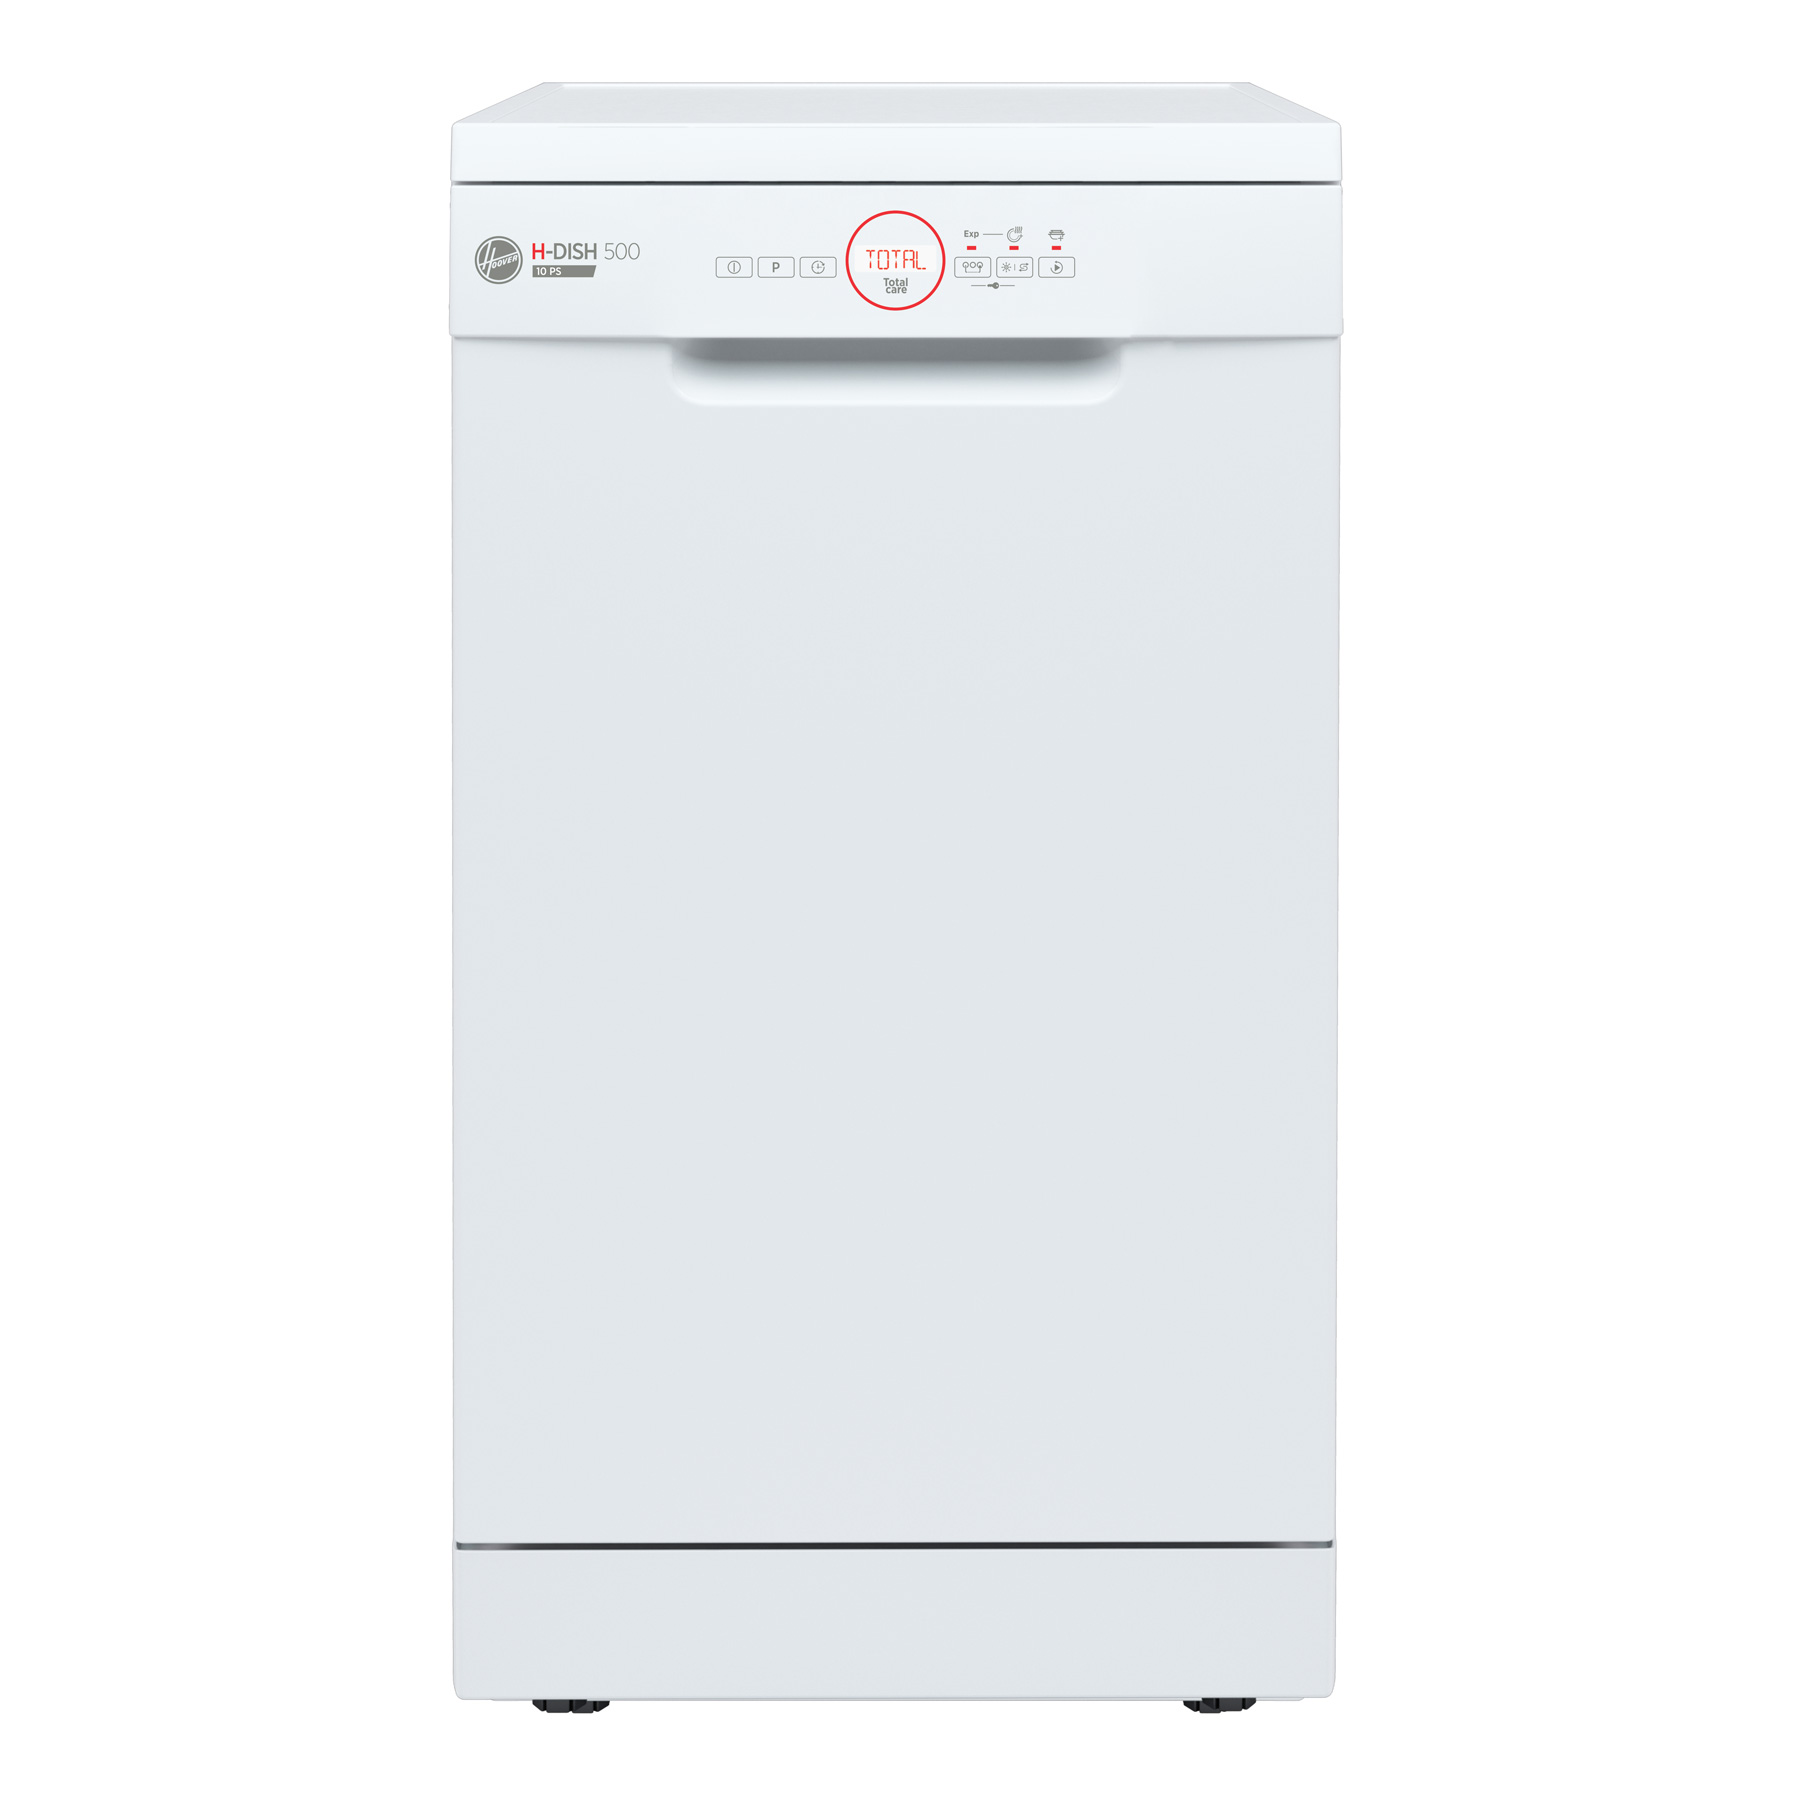 Image of Hoover HDPH2D1049W 45cm Slimline Dishwasher White 10 Place E Rated Wi